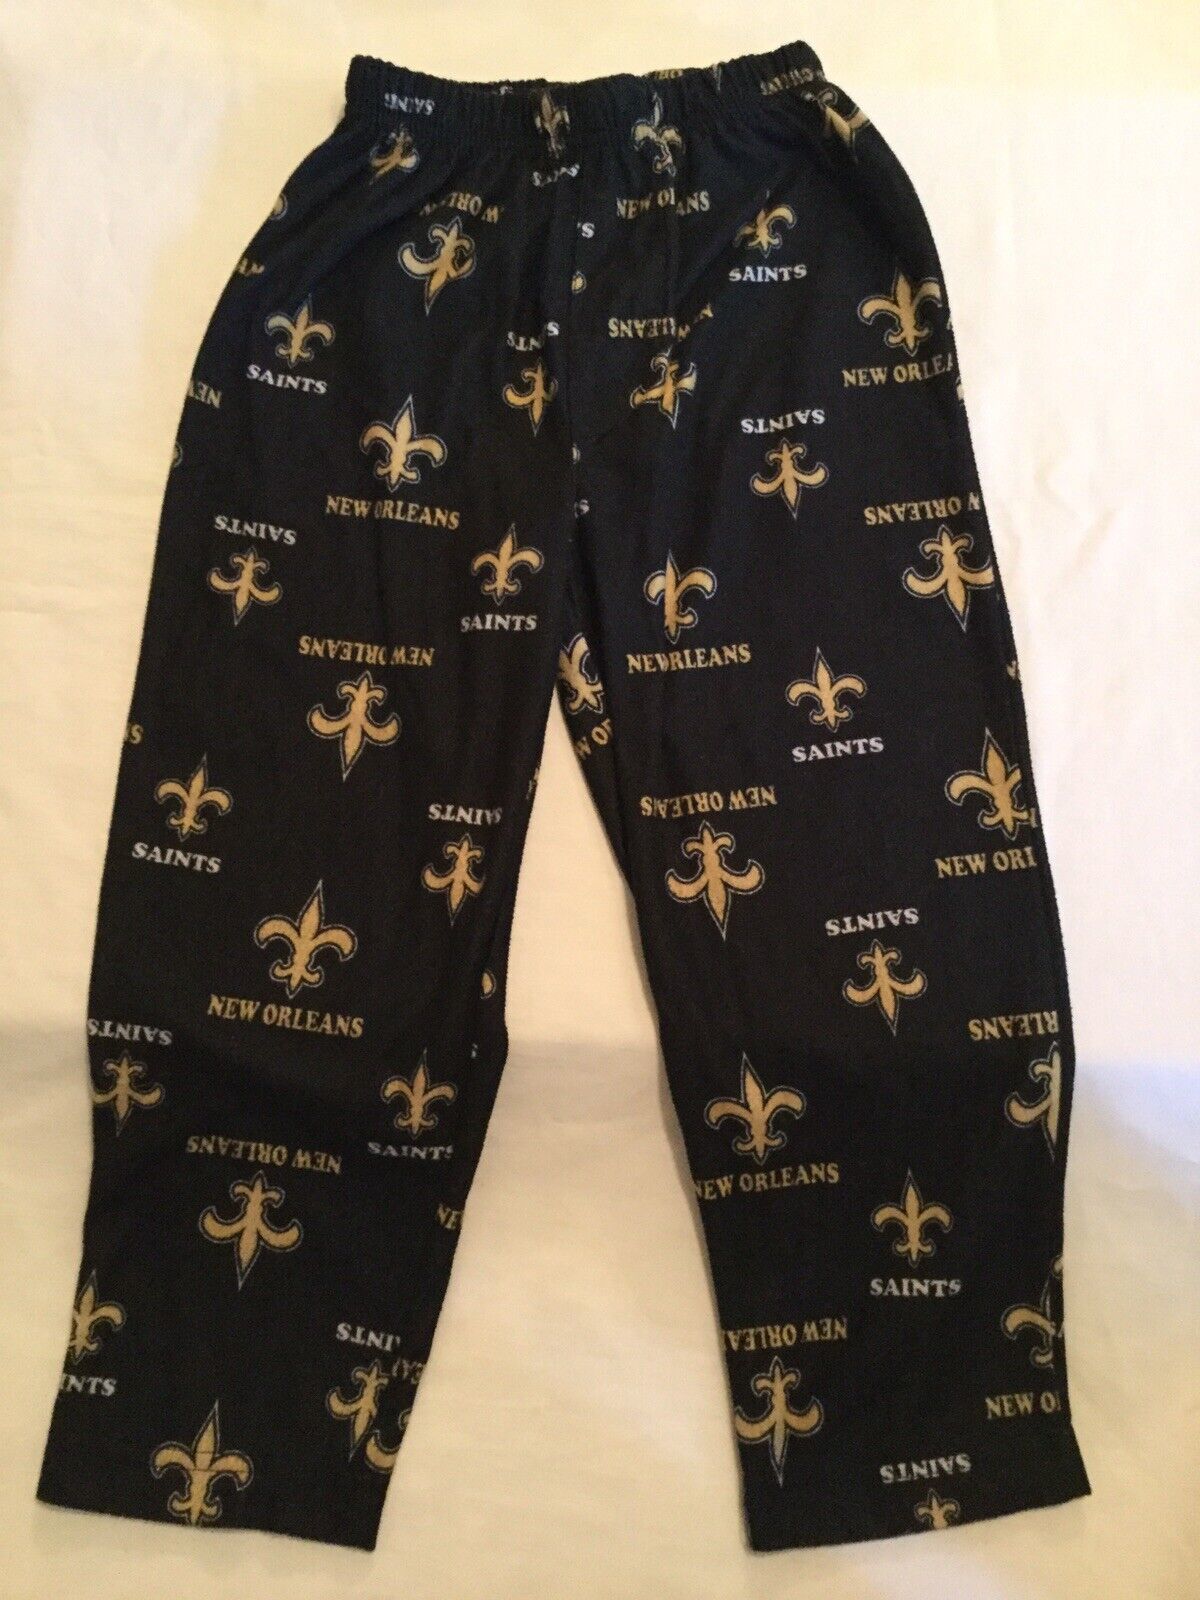 Primary image for NFL New Orleans Saints football pajamas Size 4T black elastic waist new